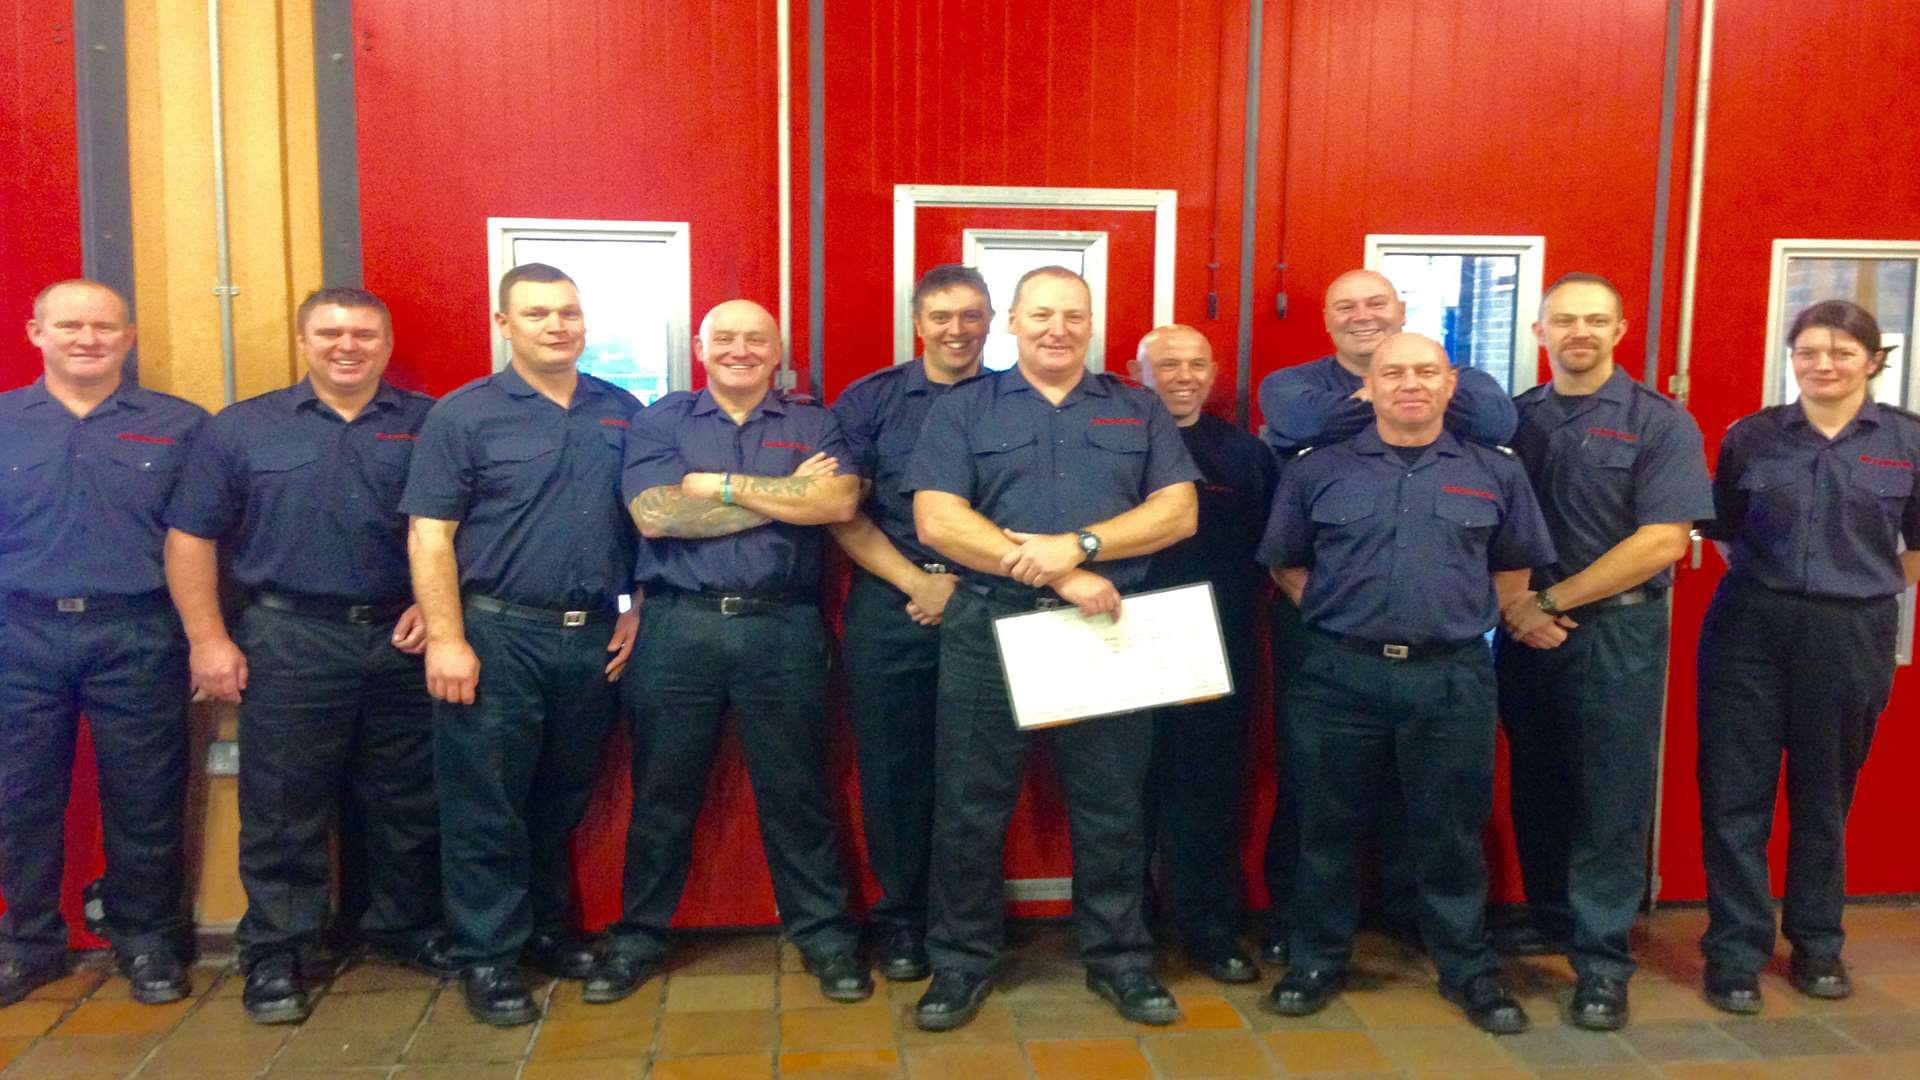 Dave Mayhew (front with white paper) and colleagues on his last day at the fire station